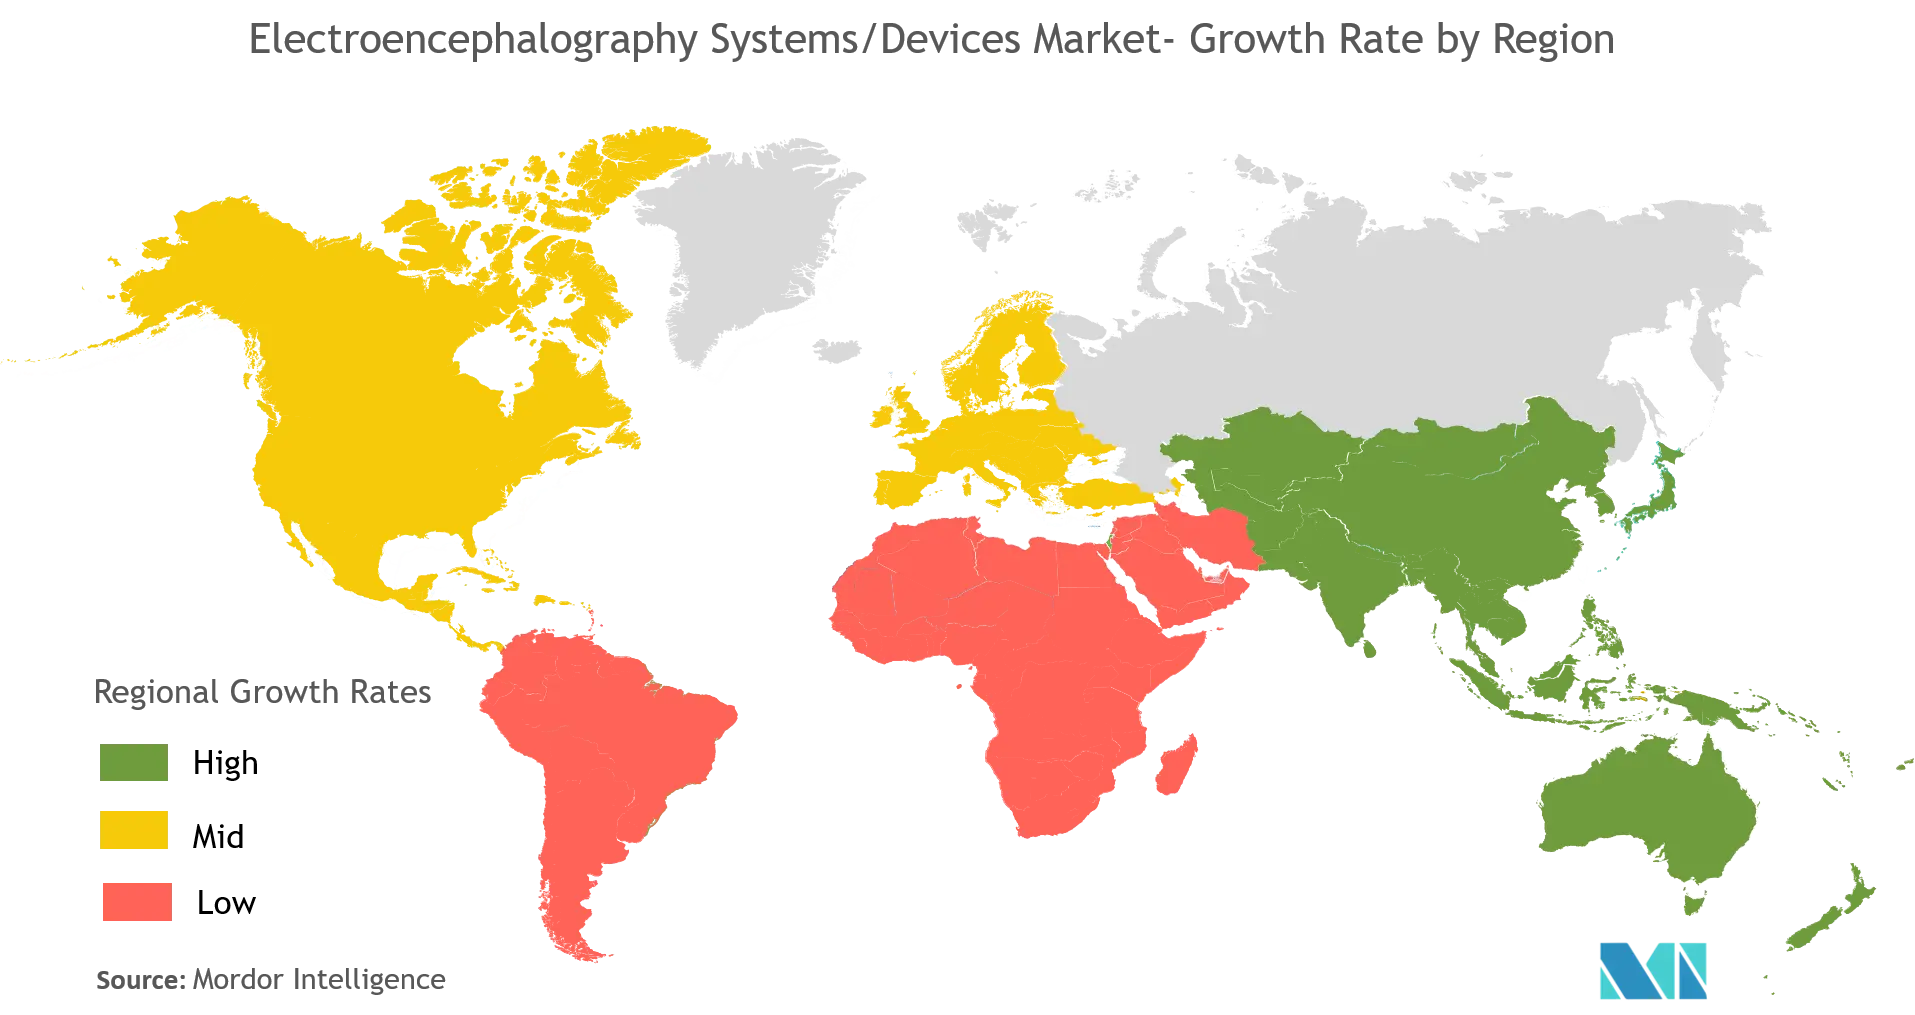 Electroencephalography Systems/Devices Market